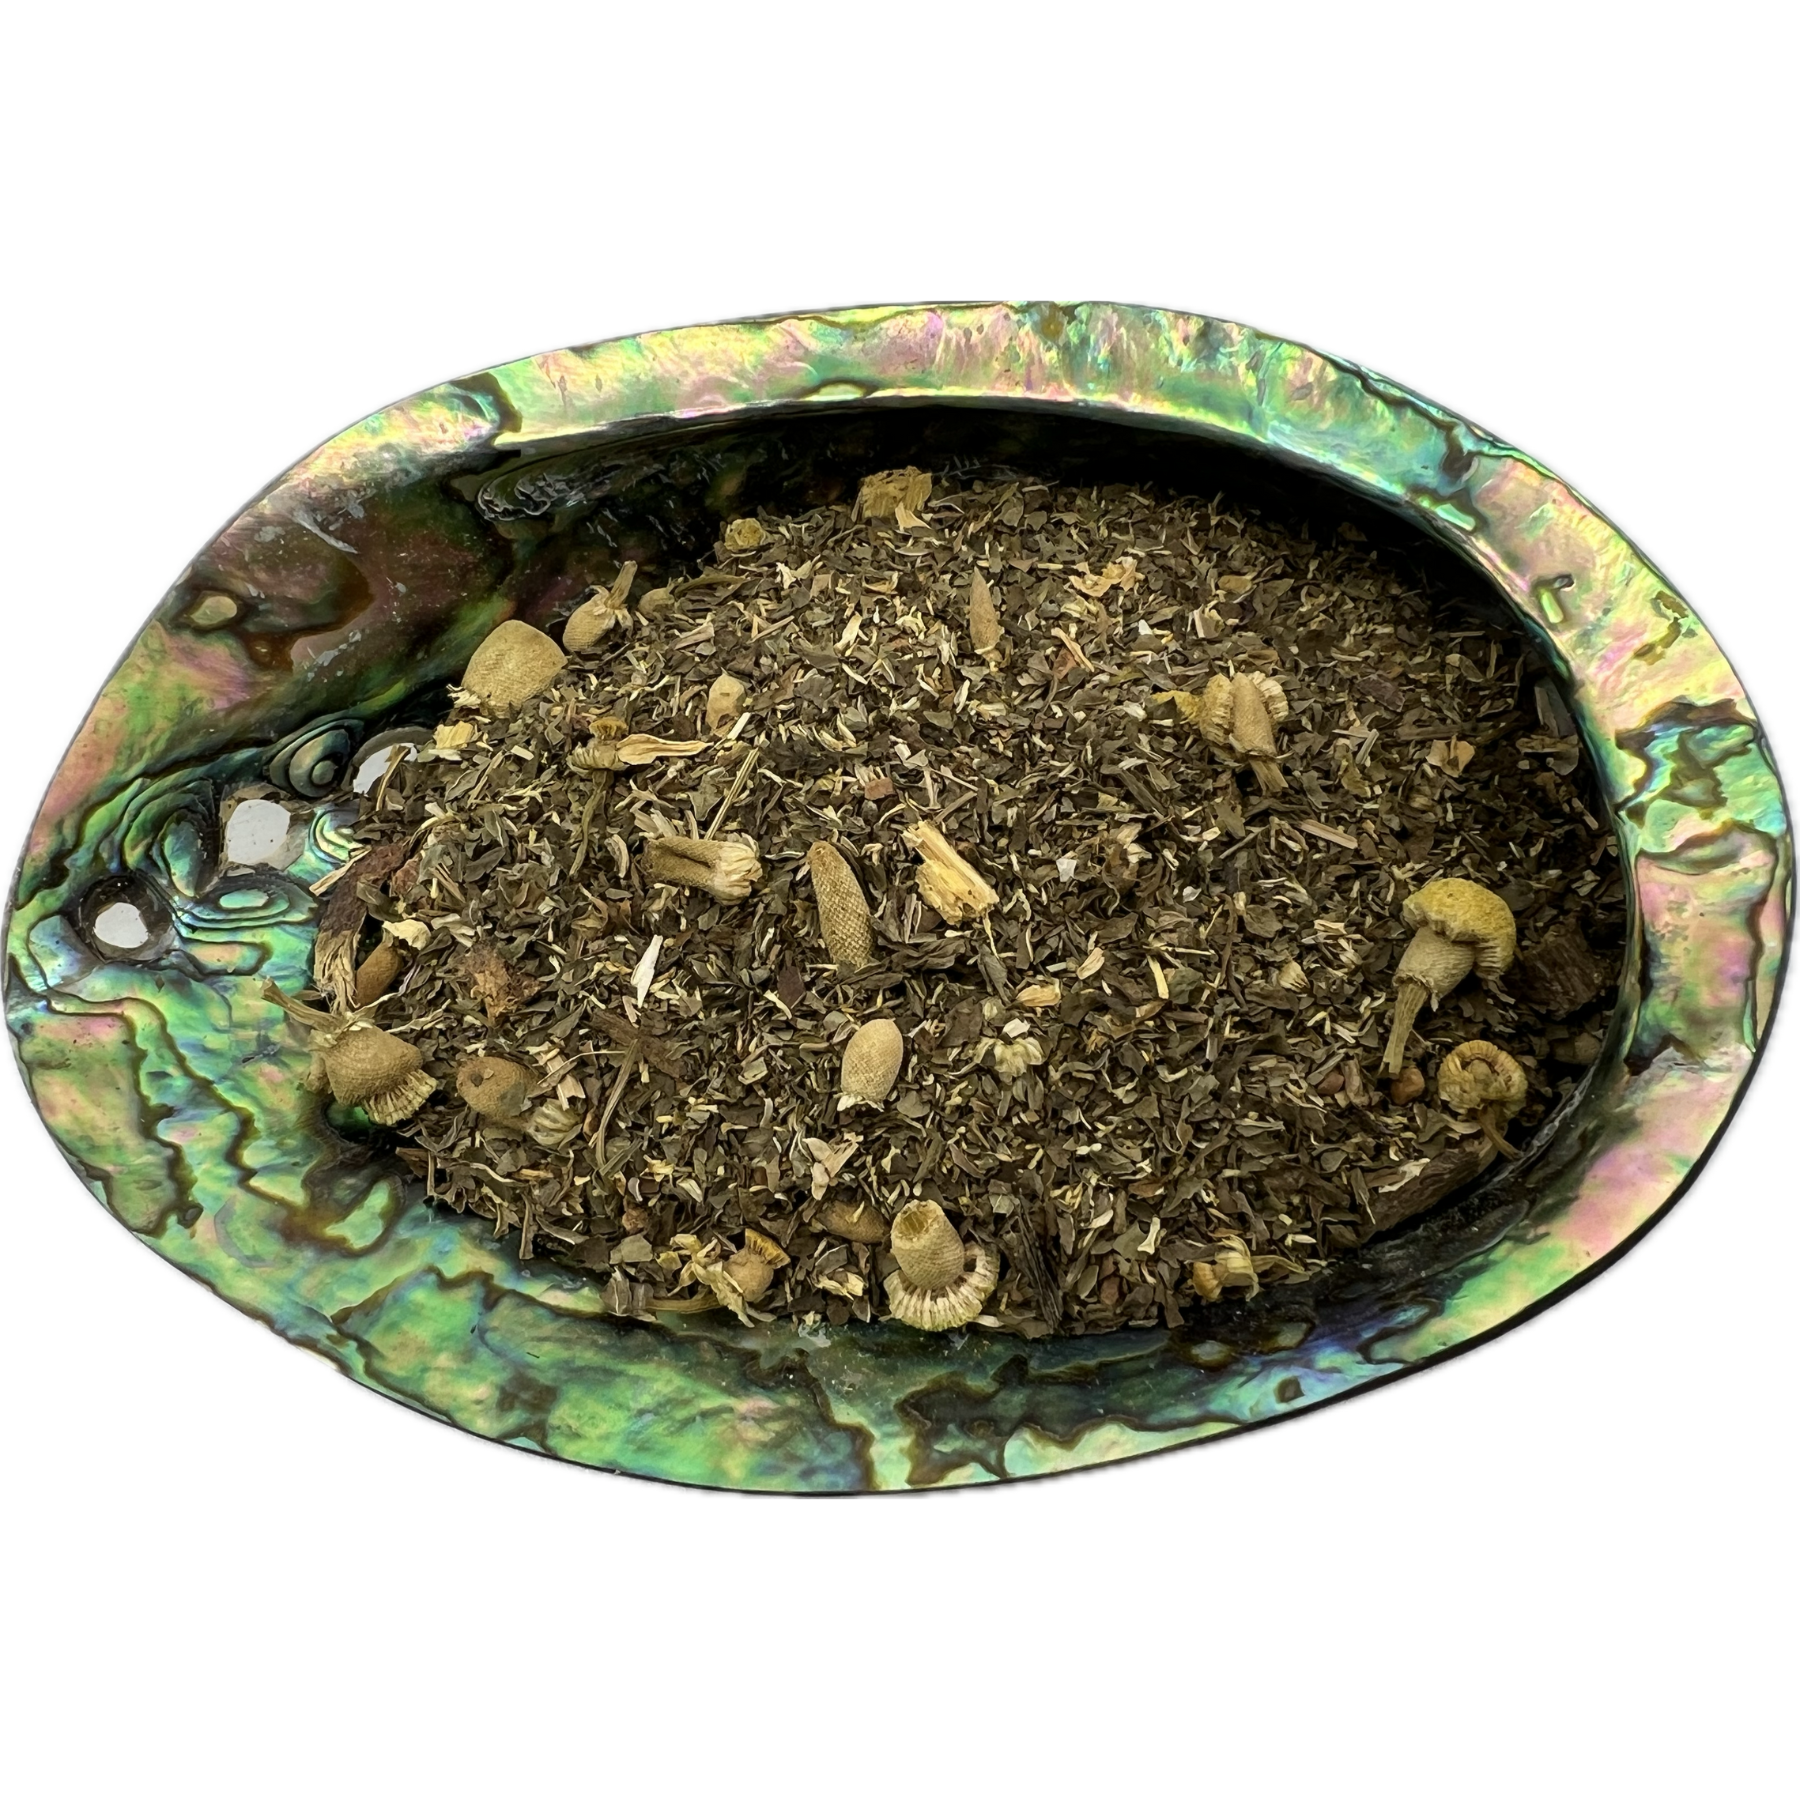 Dried mixed herbs named Afternoon Delight Tea placed on a colorful shell bowl